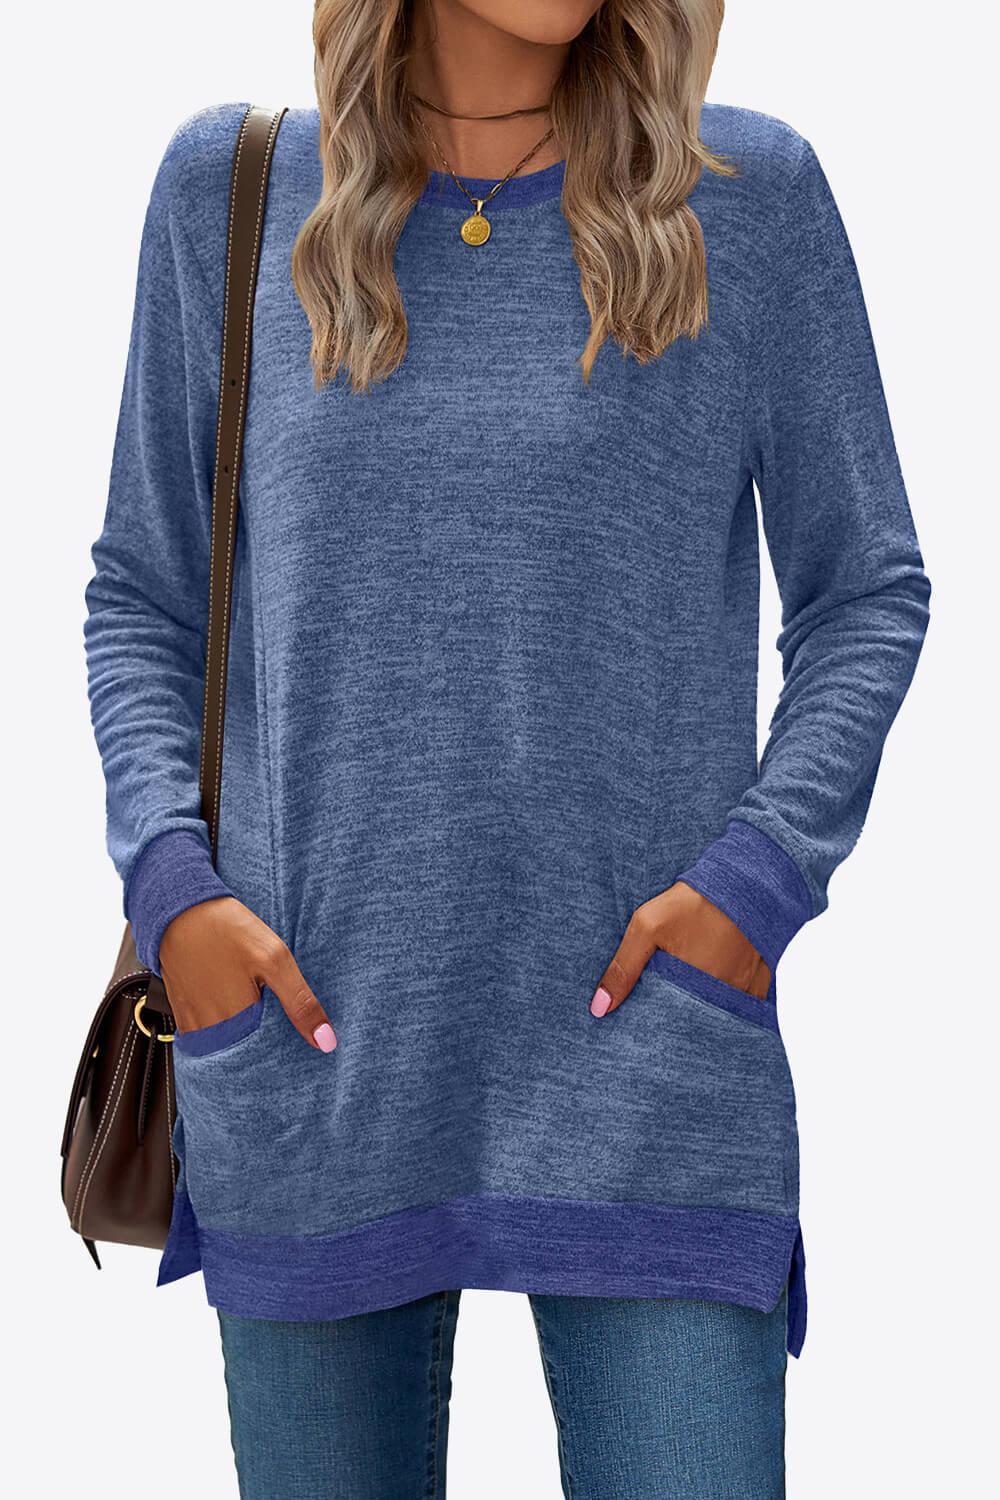 Heathered Slit Top with Pockets-TOPS / DRESSES-[Adult]-[Female]-Royal Blue-S-2022 Online Blue Zone Planet